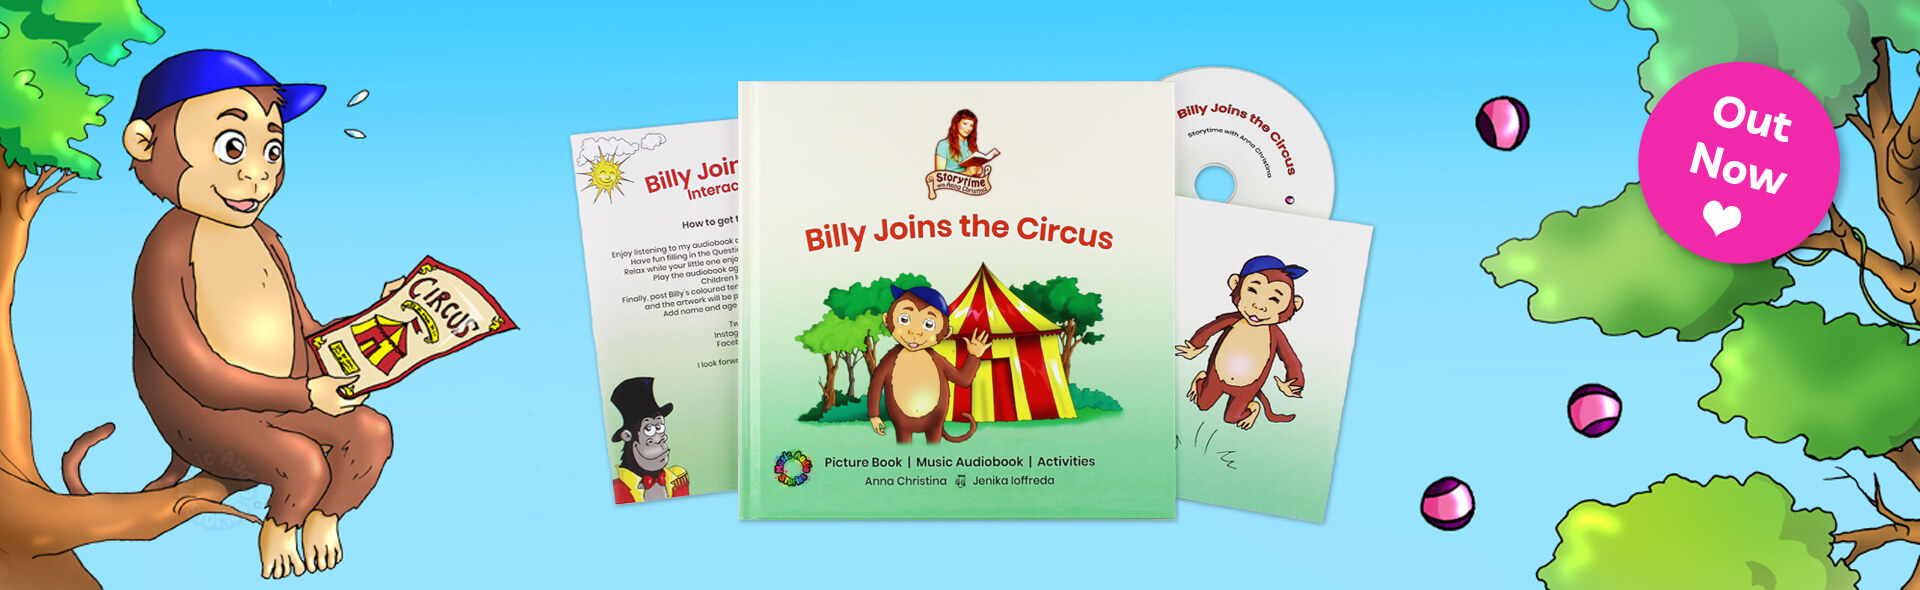 Billy Joins the Circus limited first edition picture book